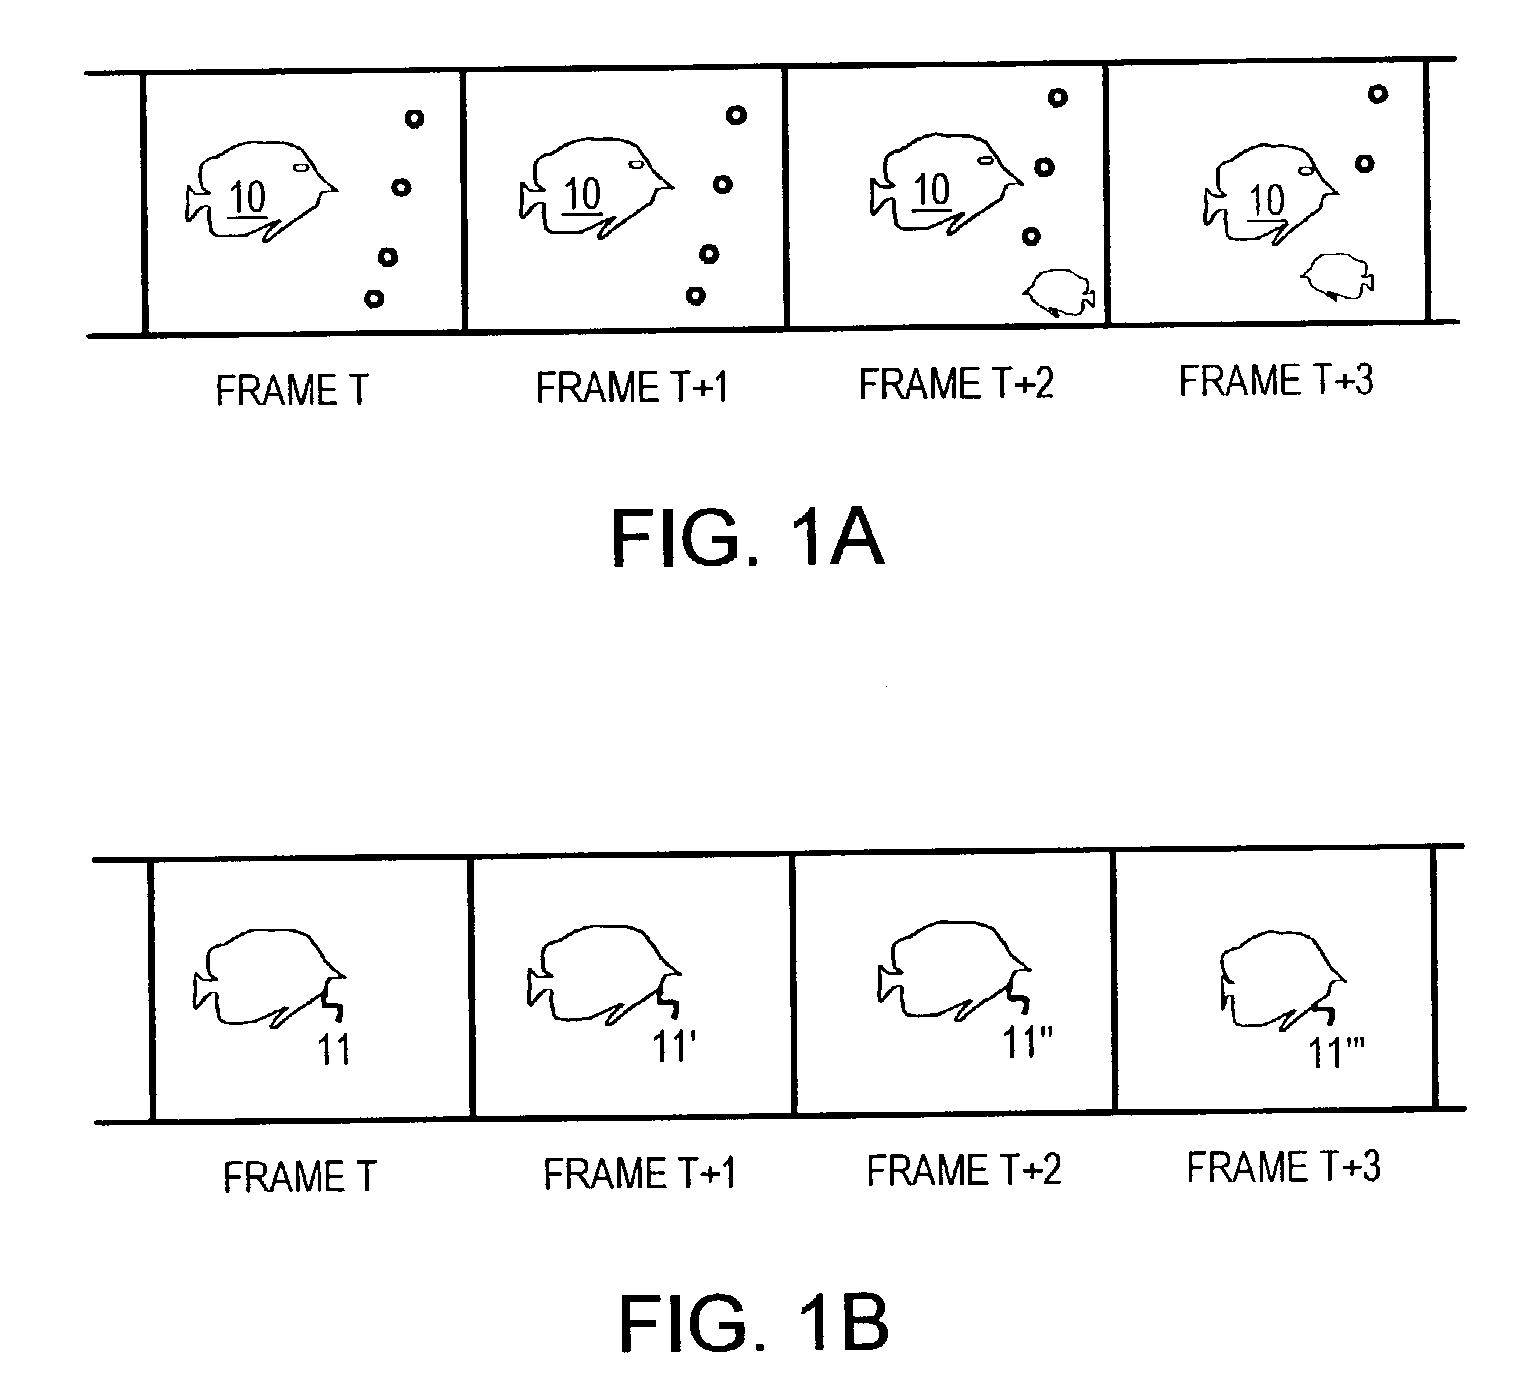 Object tracking using adaptive block-size matching along object boundary and frame-skipping when object motion is low